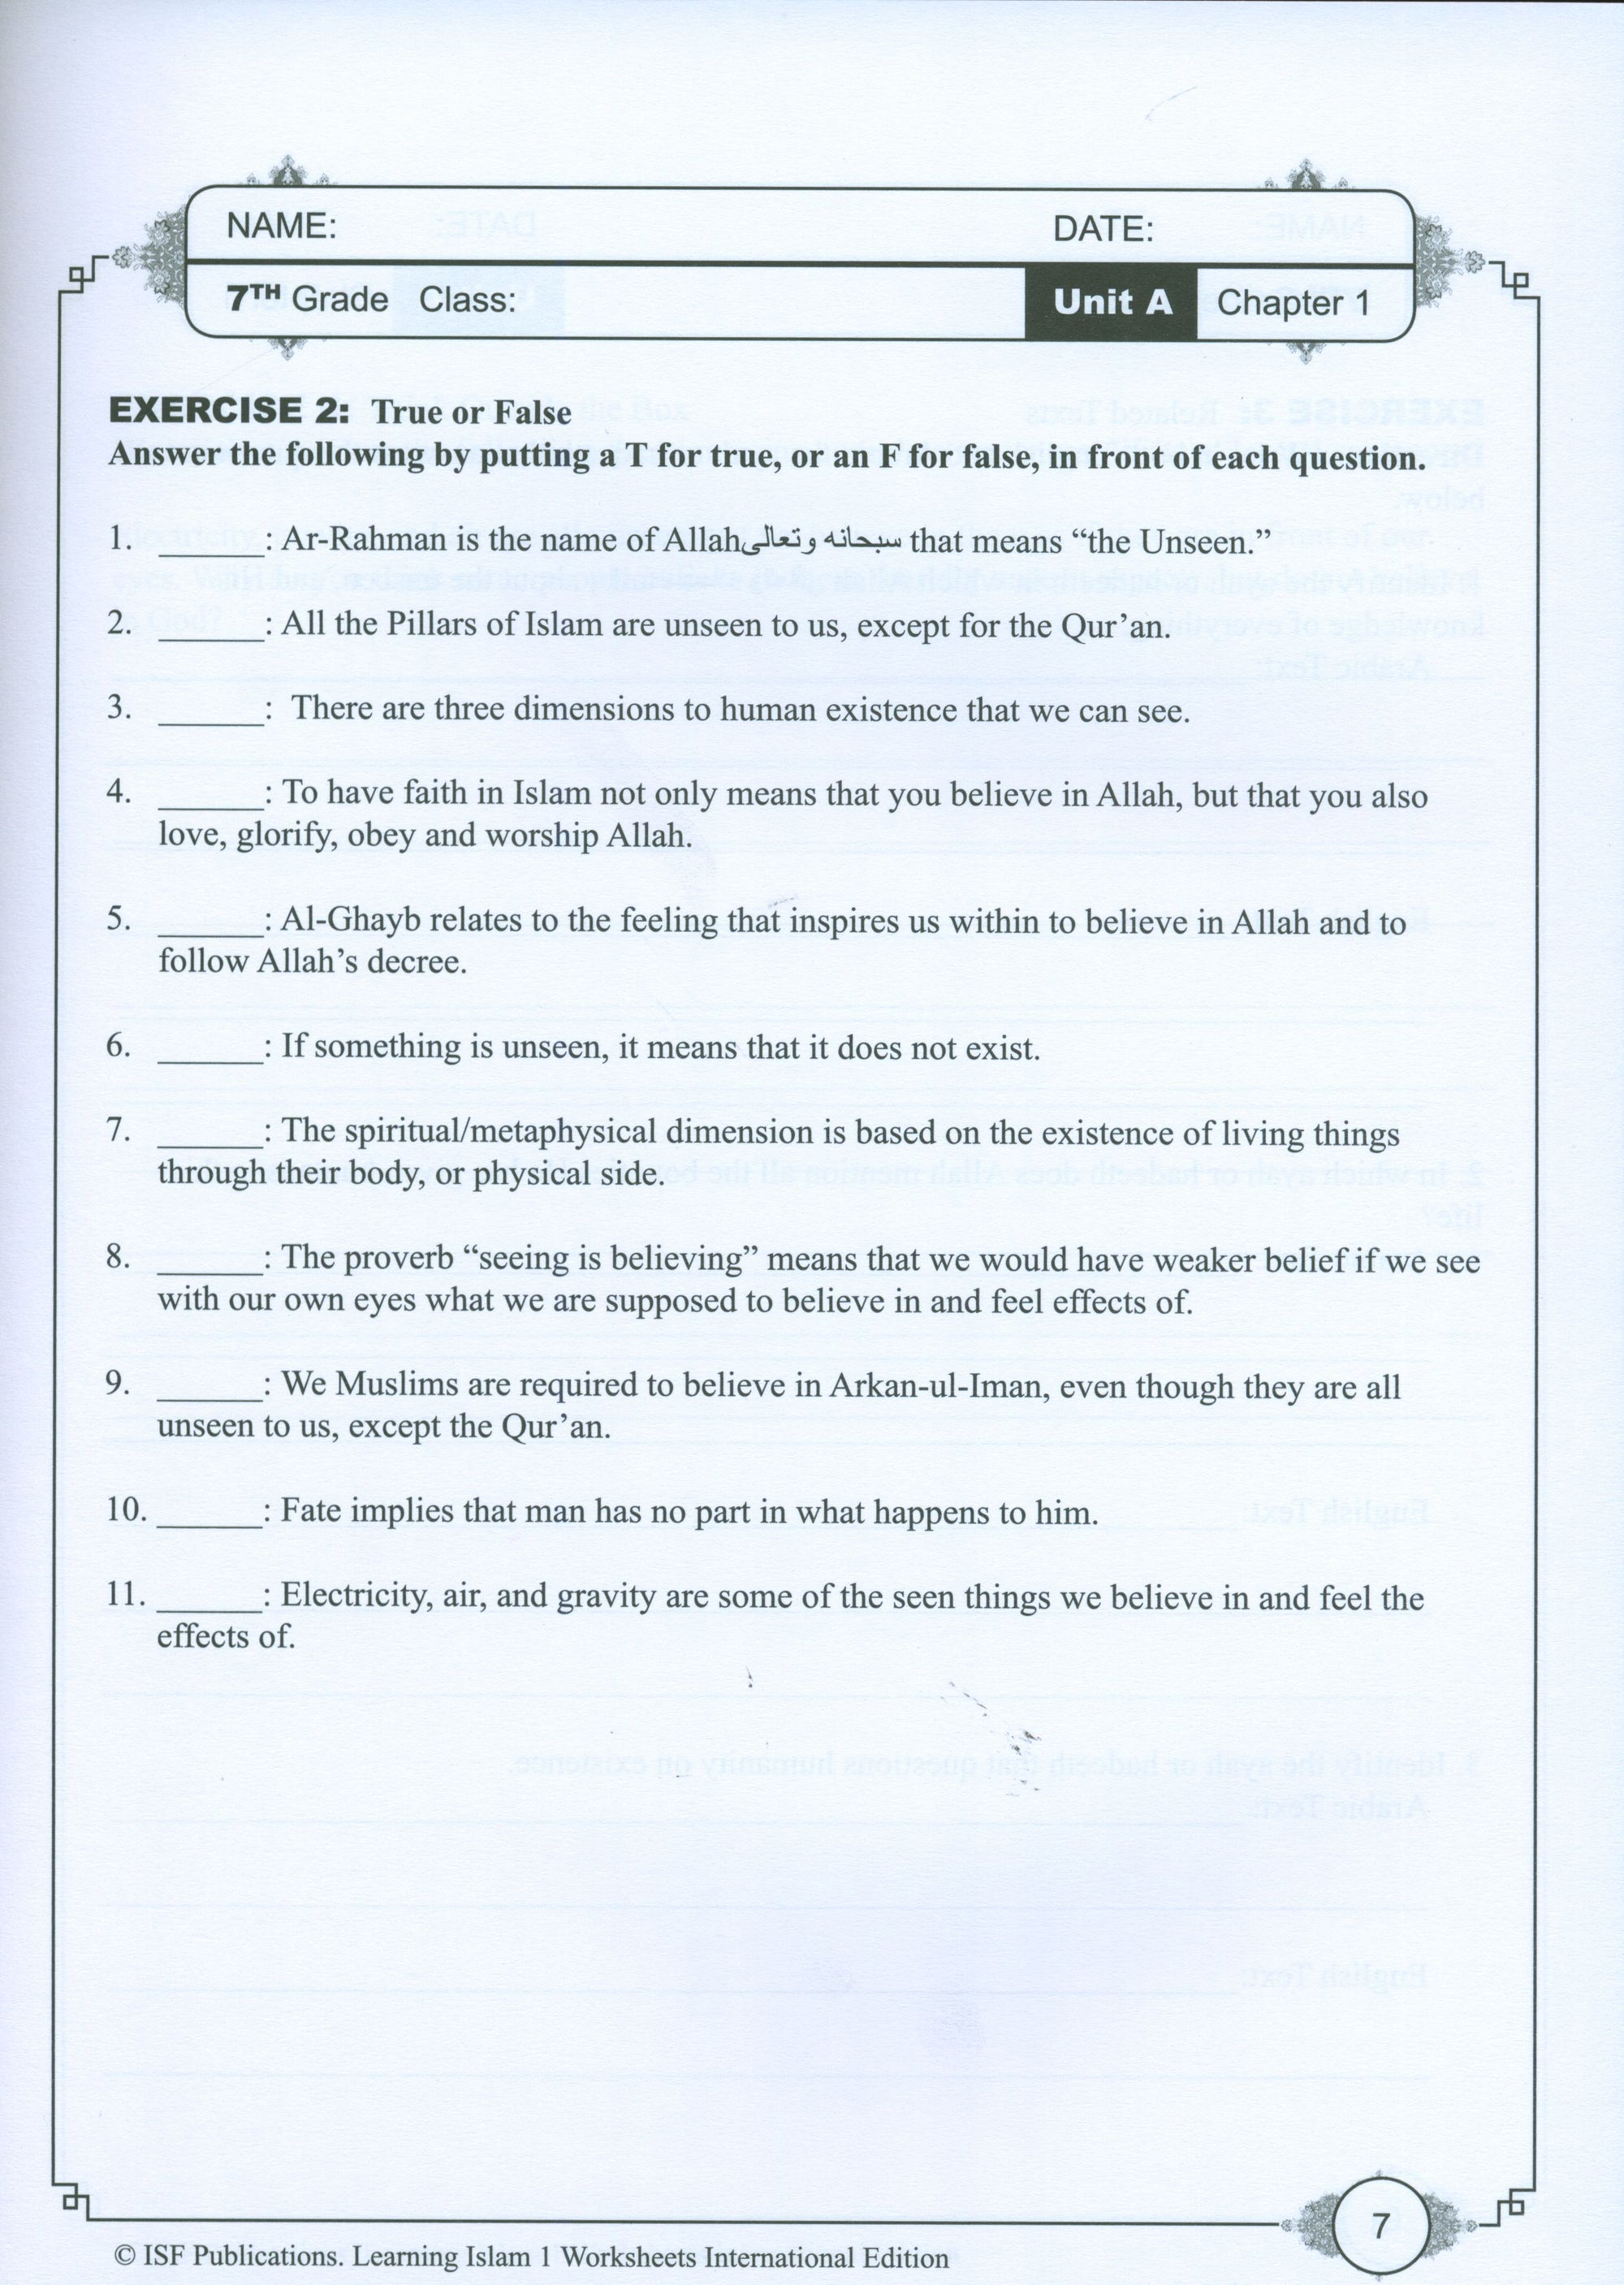 Learning Islam Weekend Edition Worksheets Level 1 (6th Grade)